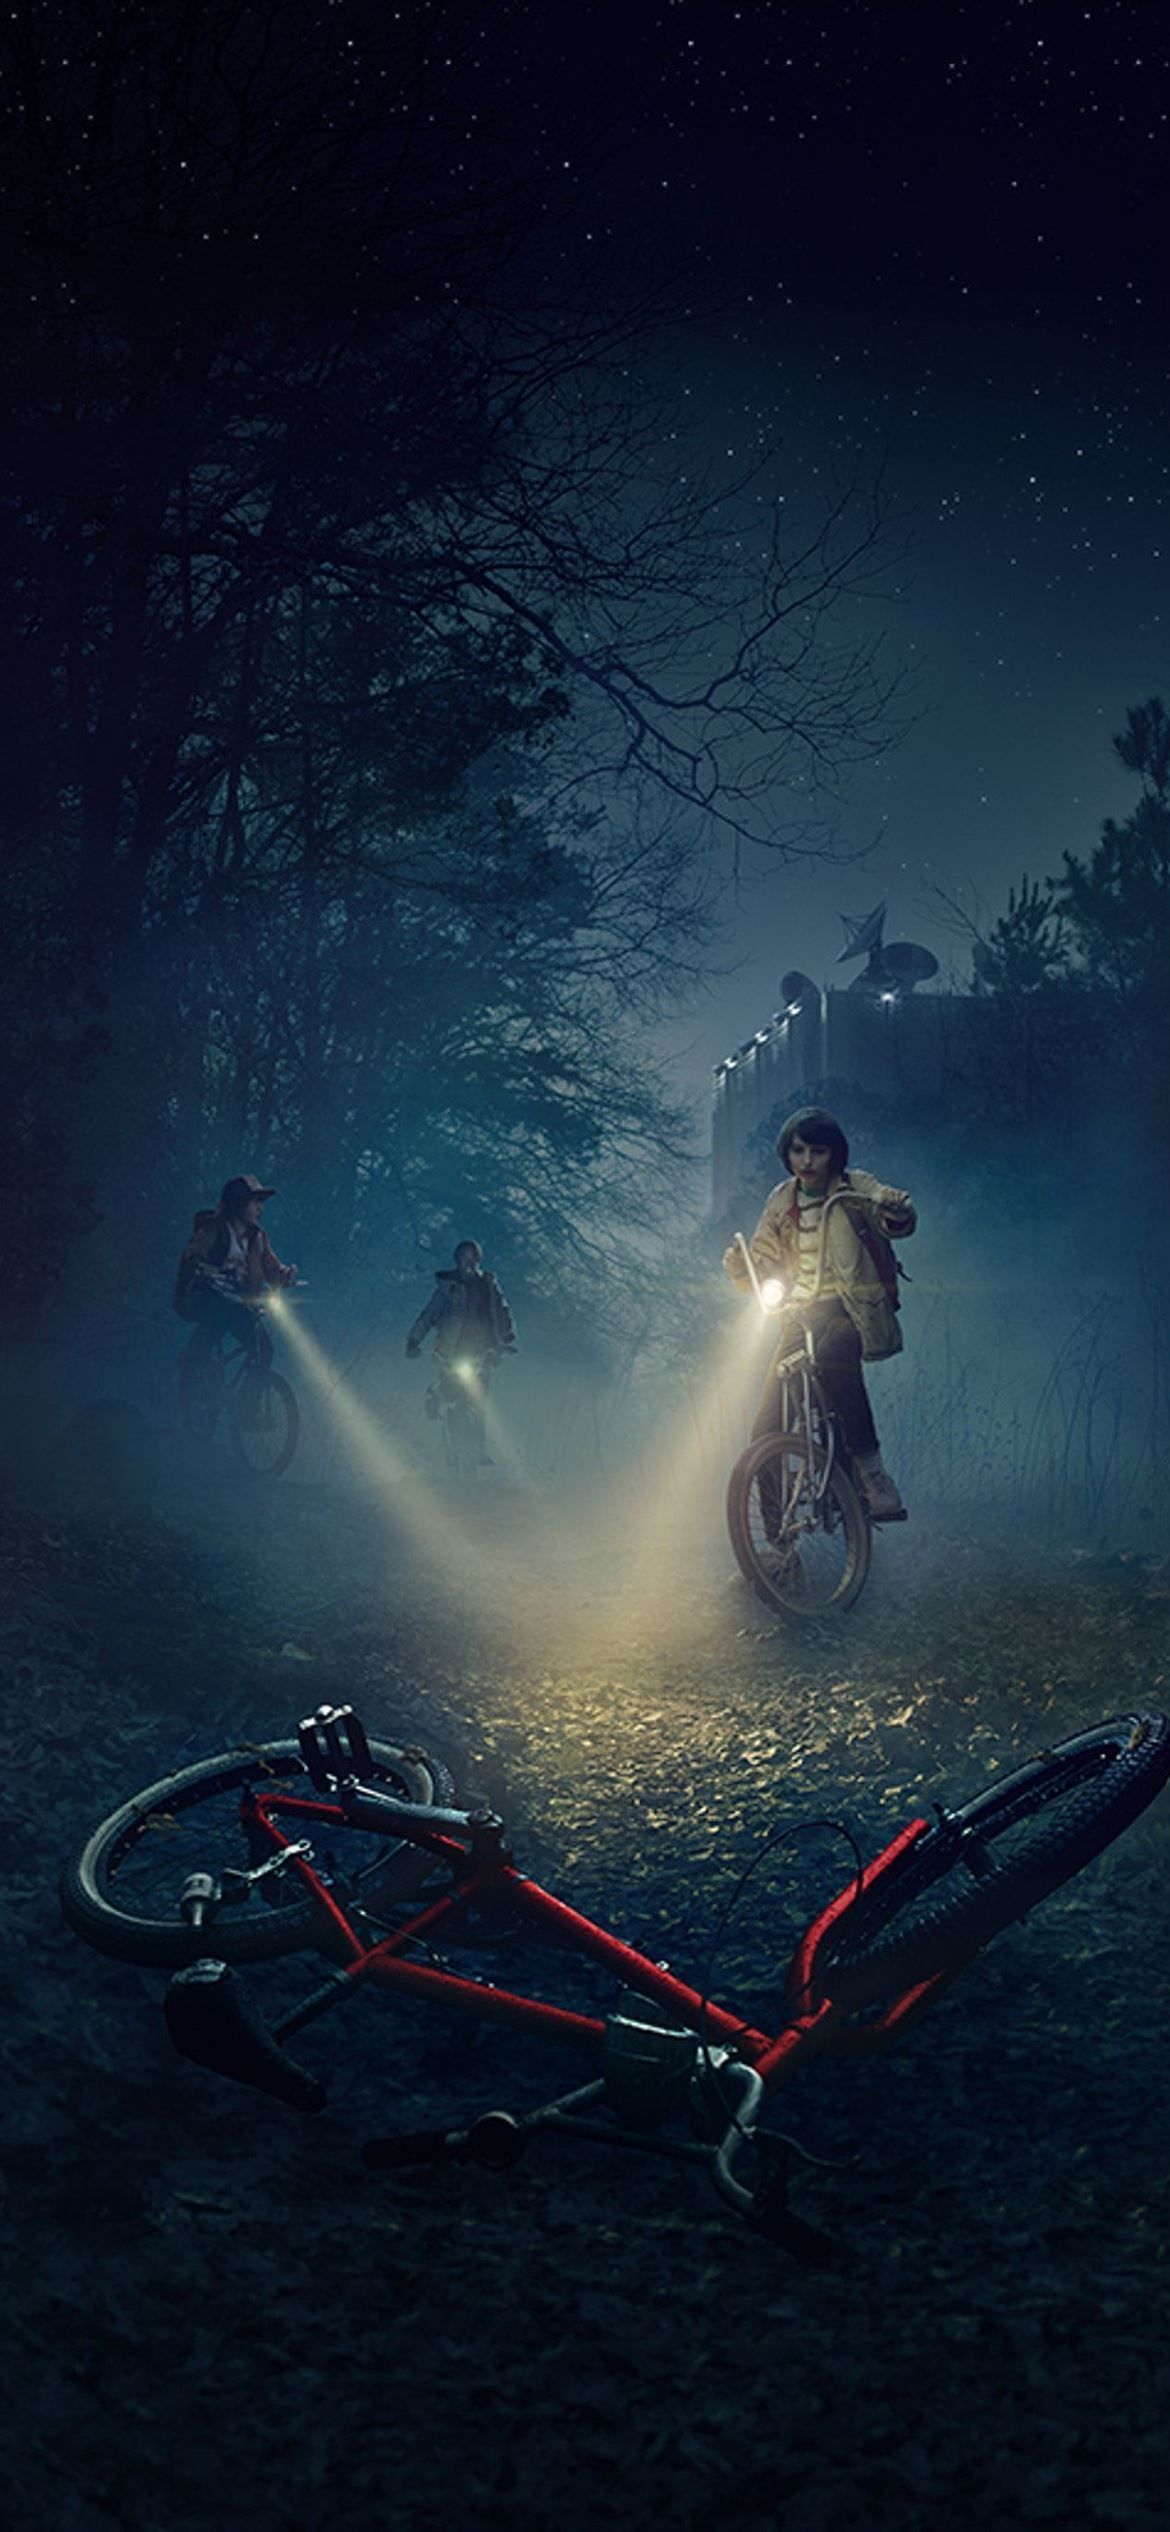 A group of people riding bikes in the dark - Stranger Things